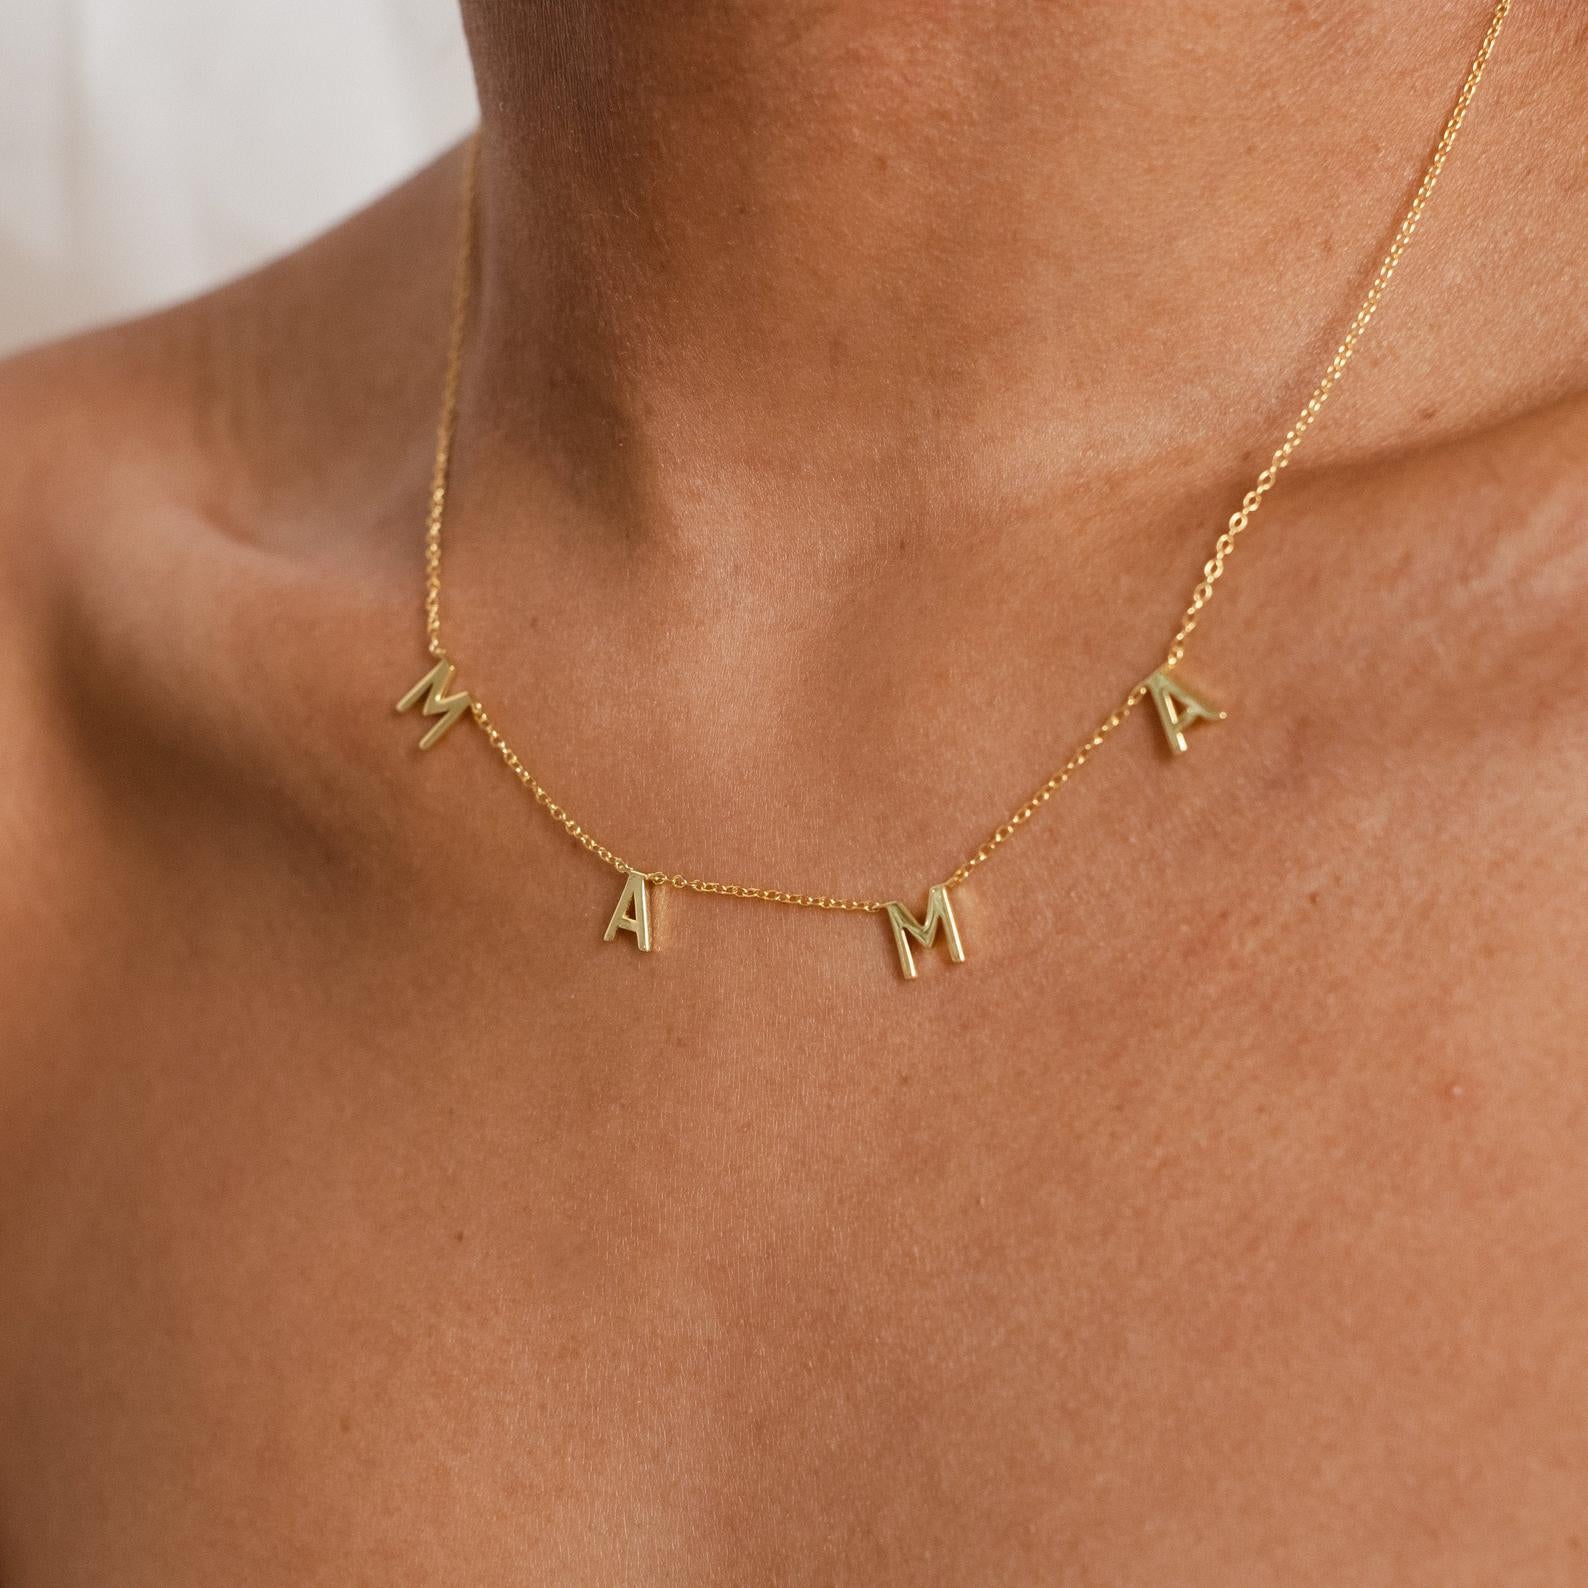 Mama Spaced Letter Necklace in 14 Karat Gold